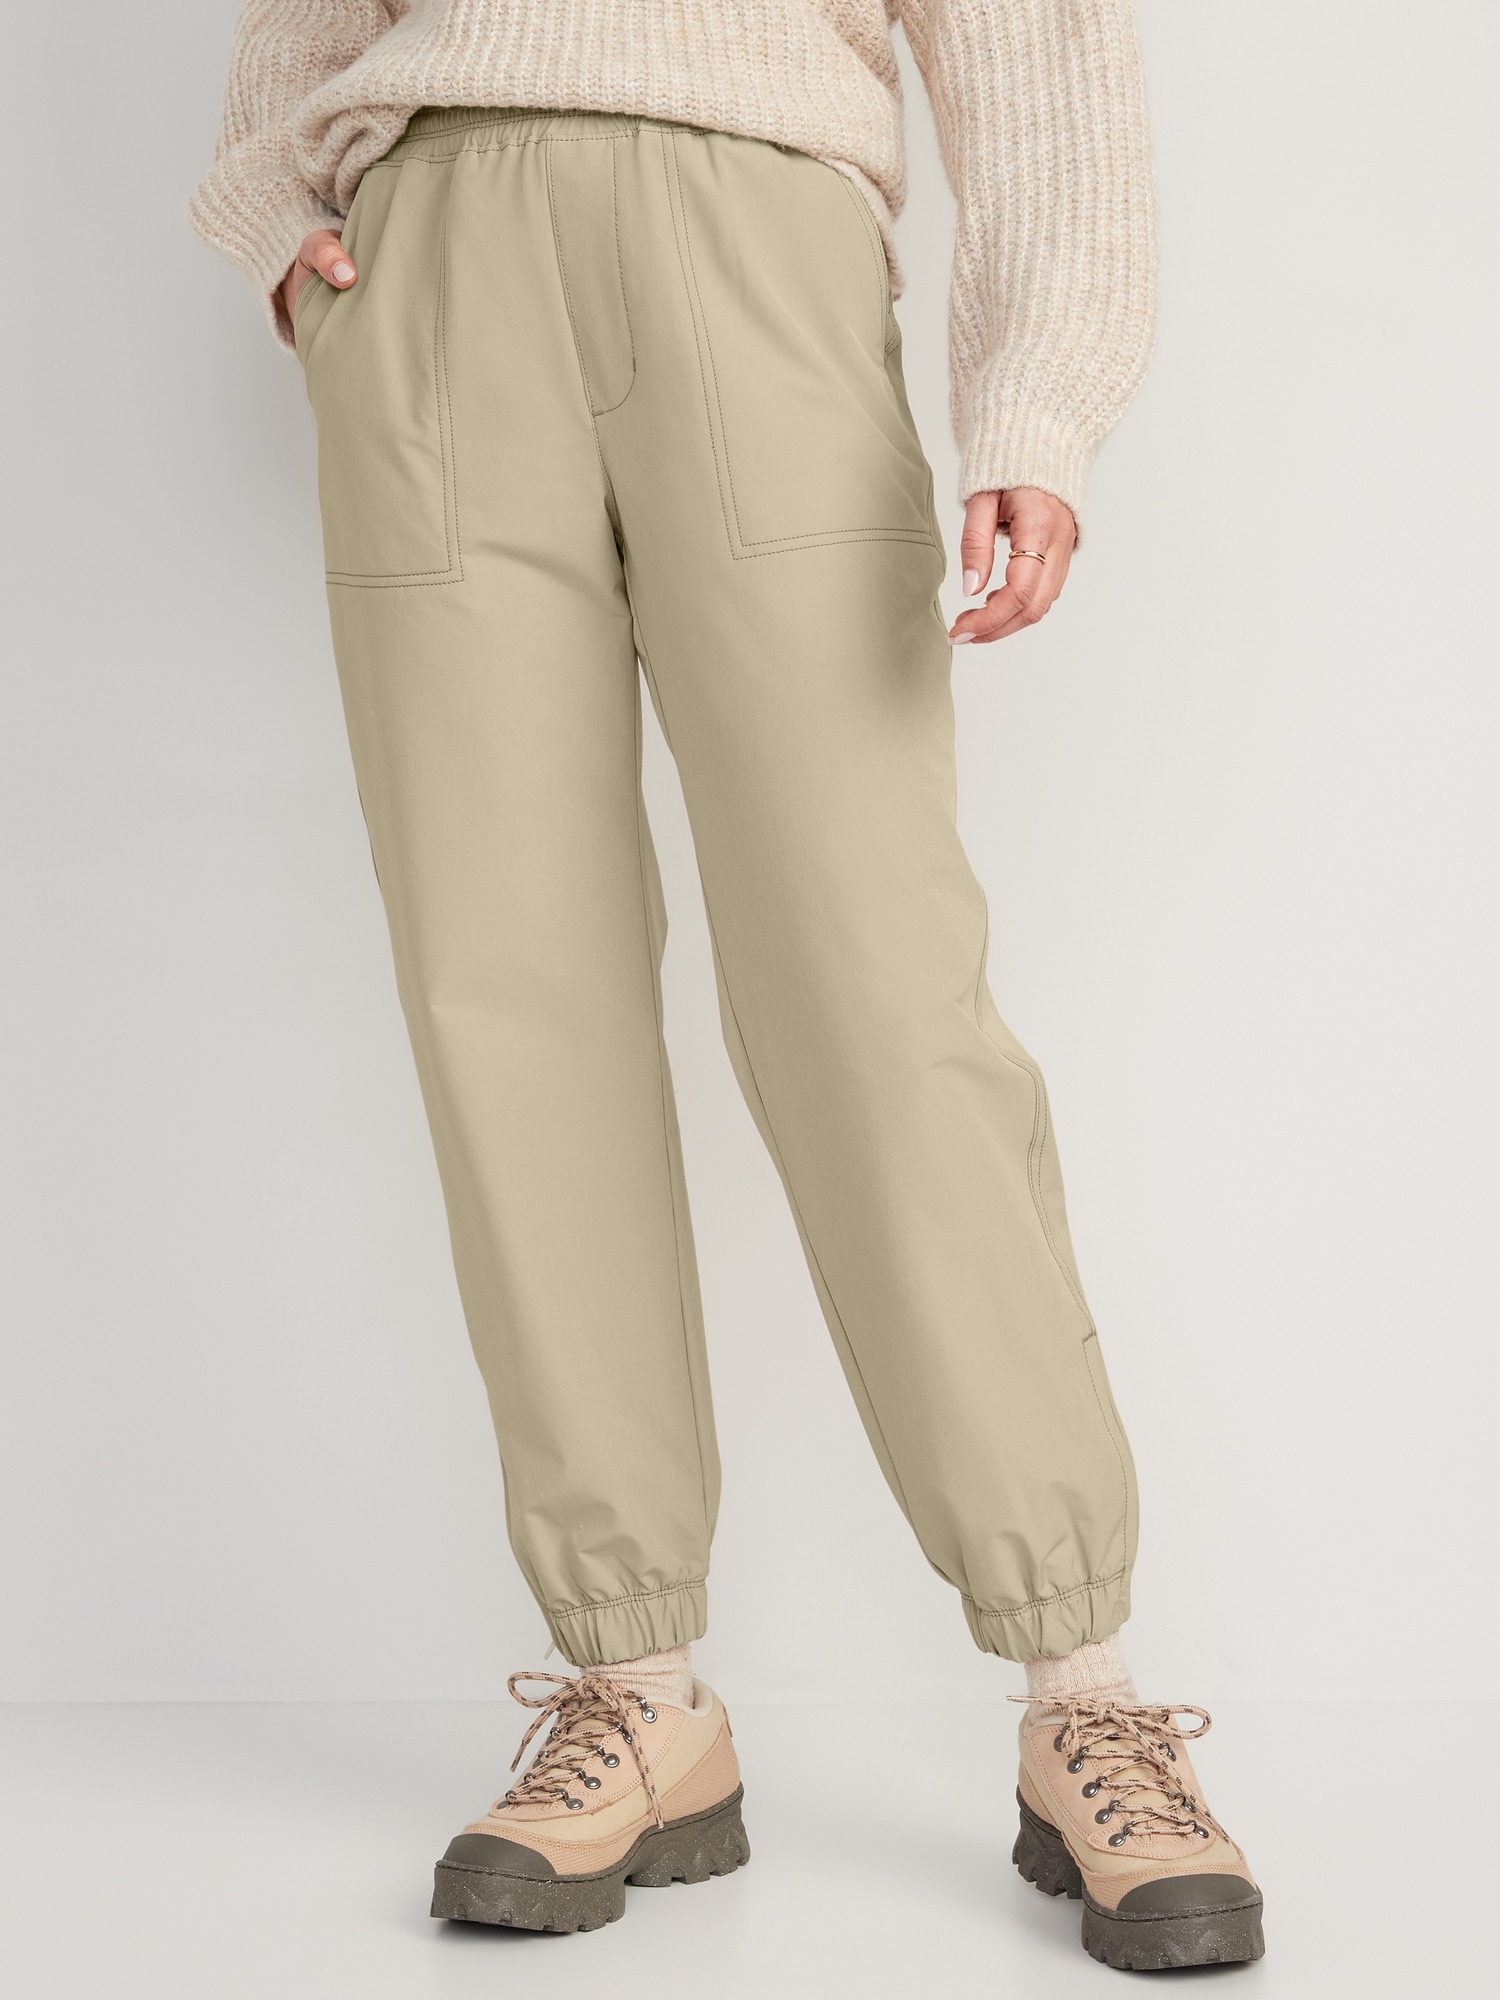 Old Navy High-Waisted All-Seasons StretchTech Water-Repellent Jogger Pants for Women beige. 1